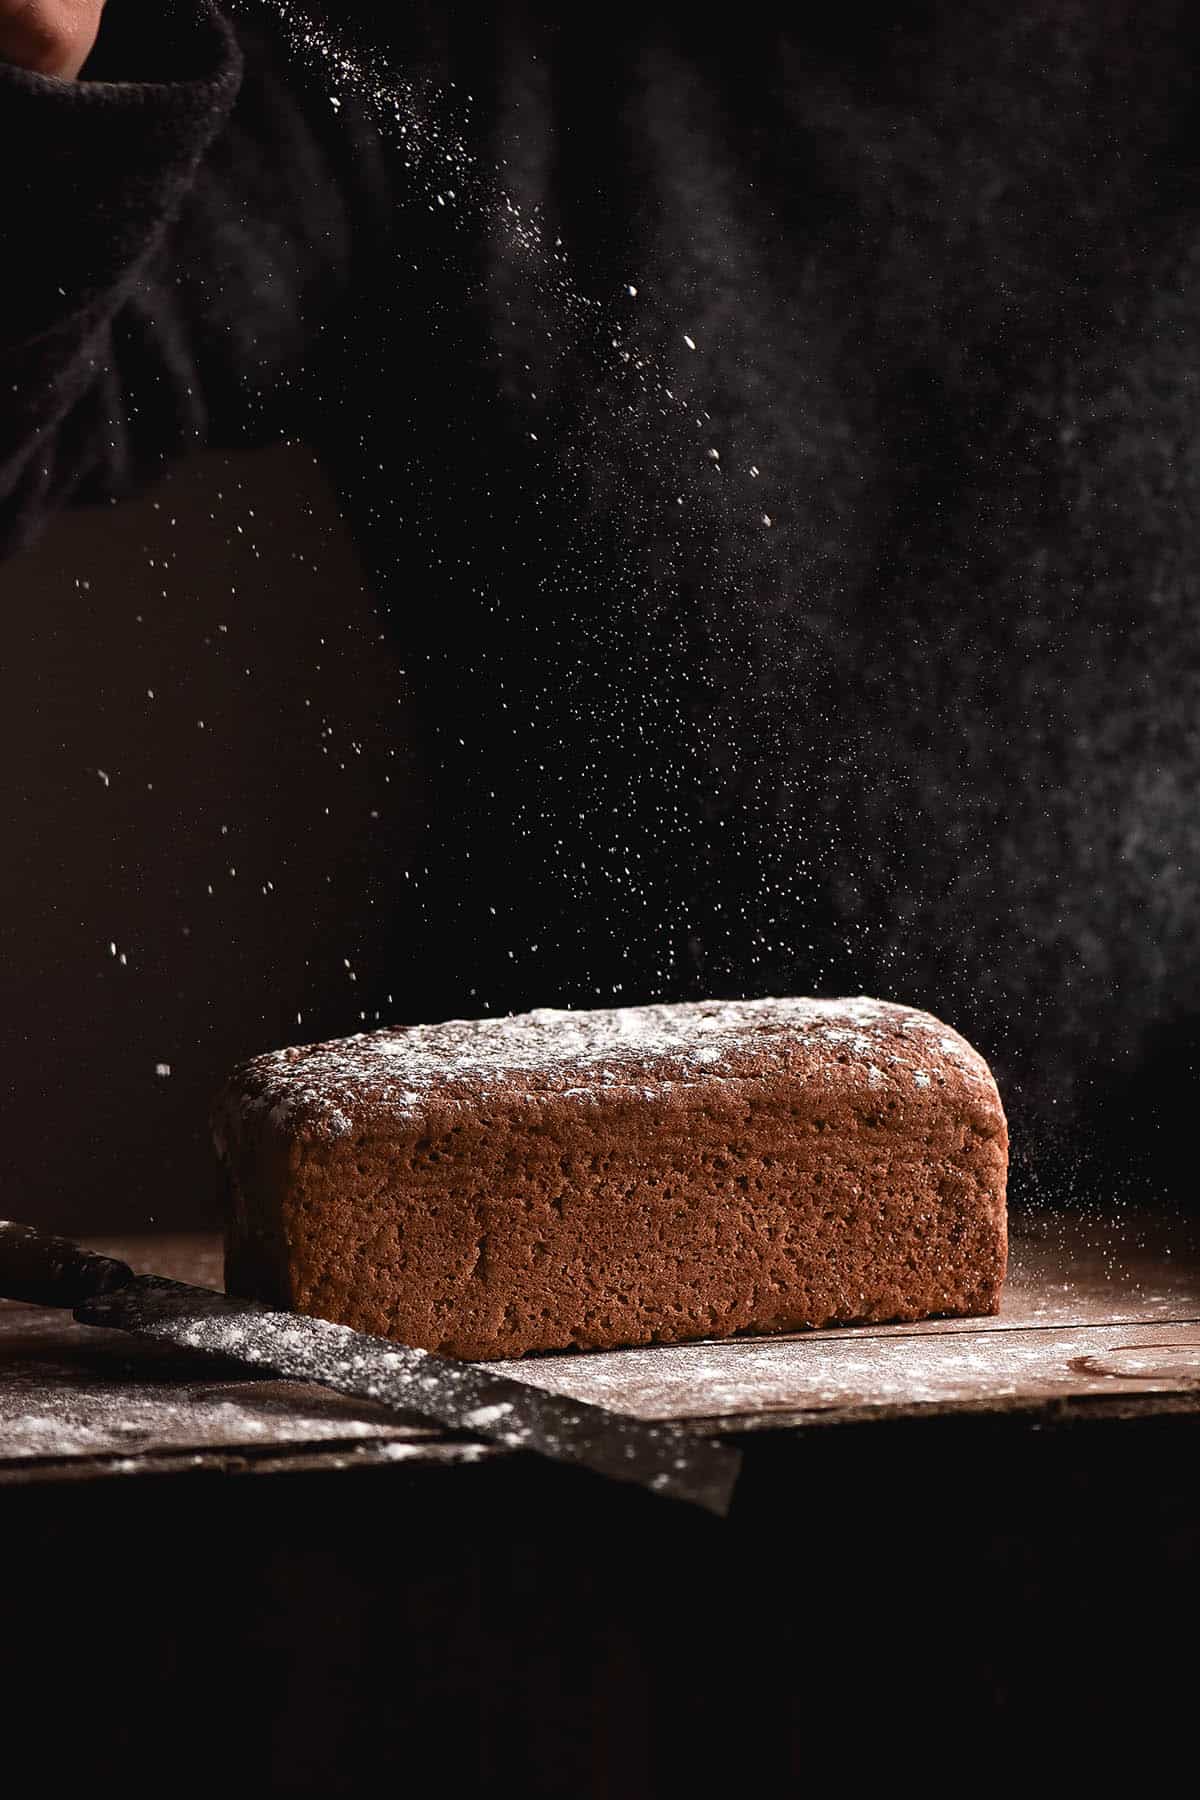 A side on dark image of a loaf of gluten free buckwheat bread. The loaf sits on a wooden table and flour sprinkles down from the top of the image onto the loaf